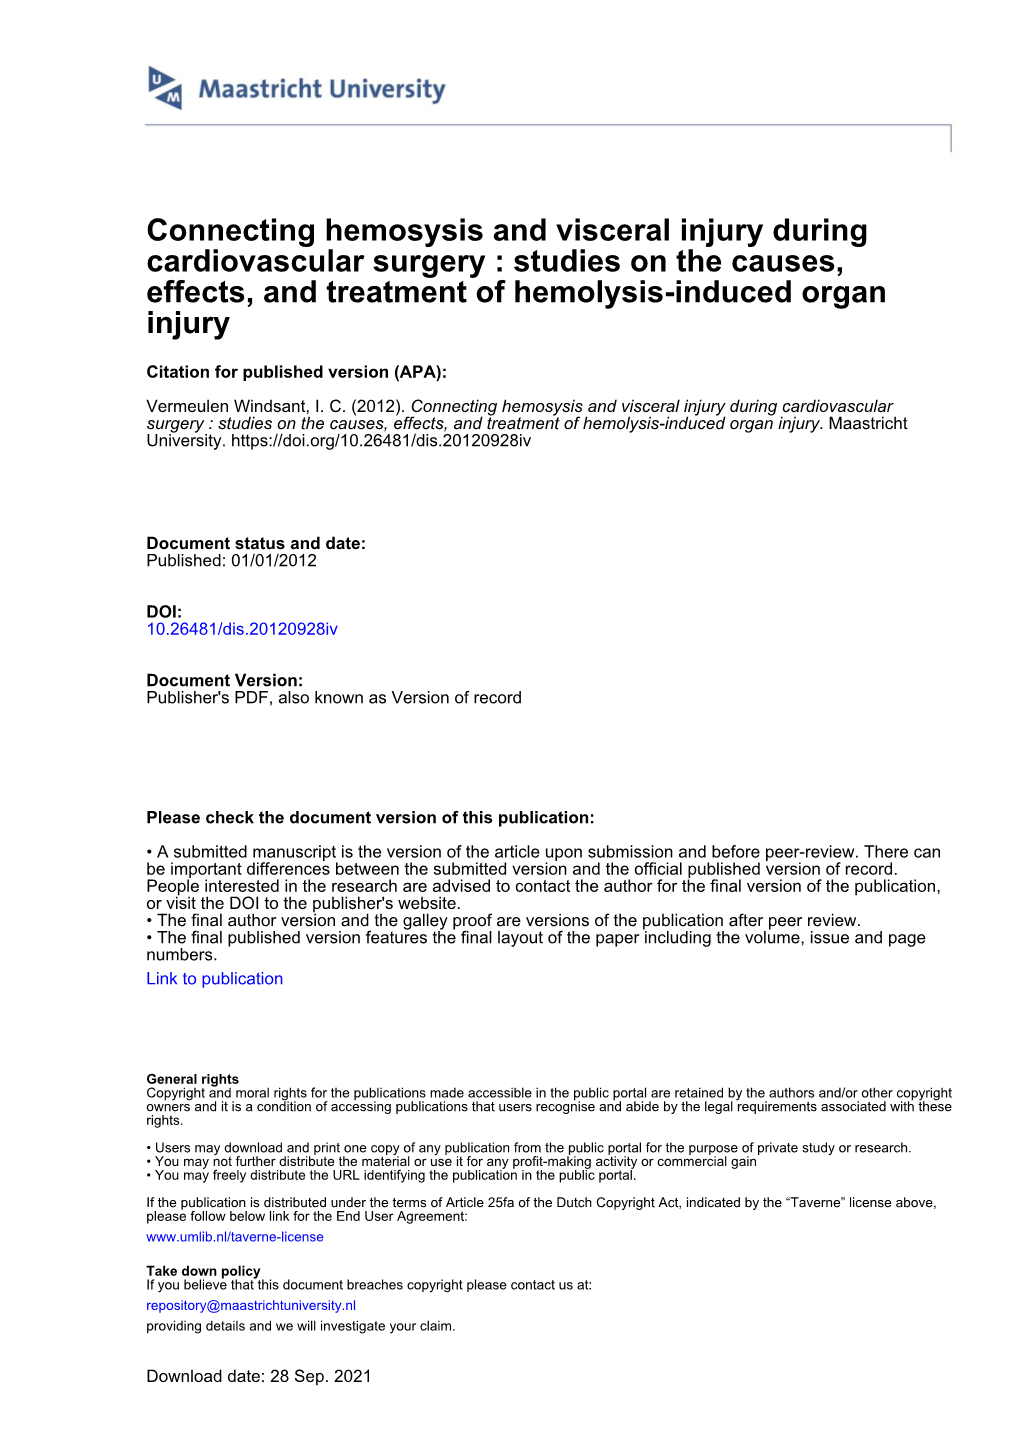 Connecting Hemosysis and Visceral Injury During Cardiovascular Surgery : Studies on the Causes, Effects, and Treatment of Hemolysis-Induced Organ Injury